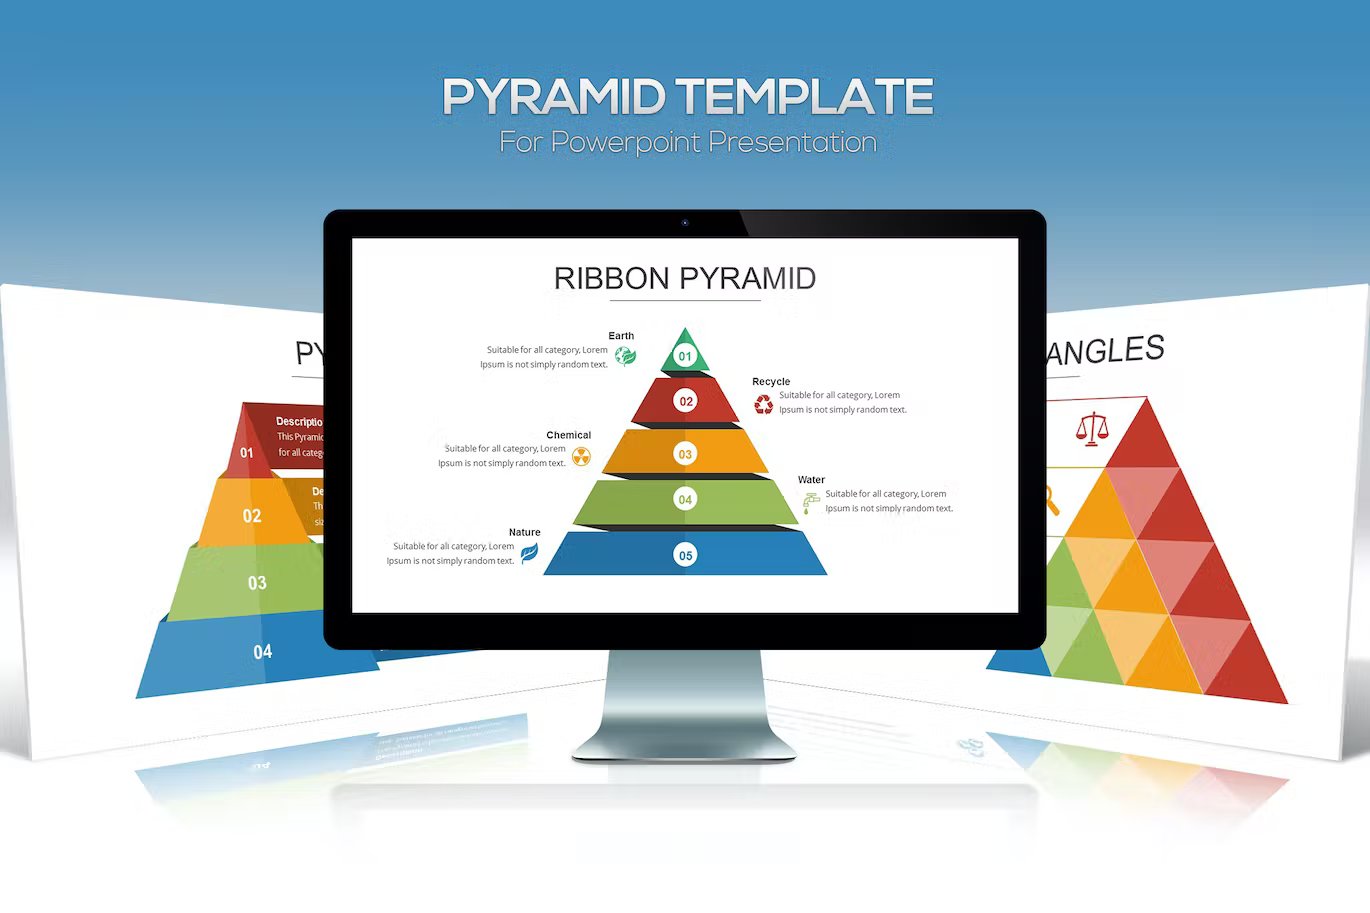 White lettering "Pyramid Template" and mockup IMac with presentation template on a white and blue background.